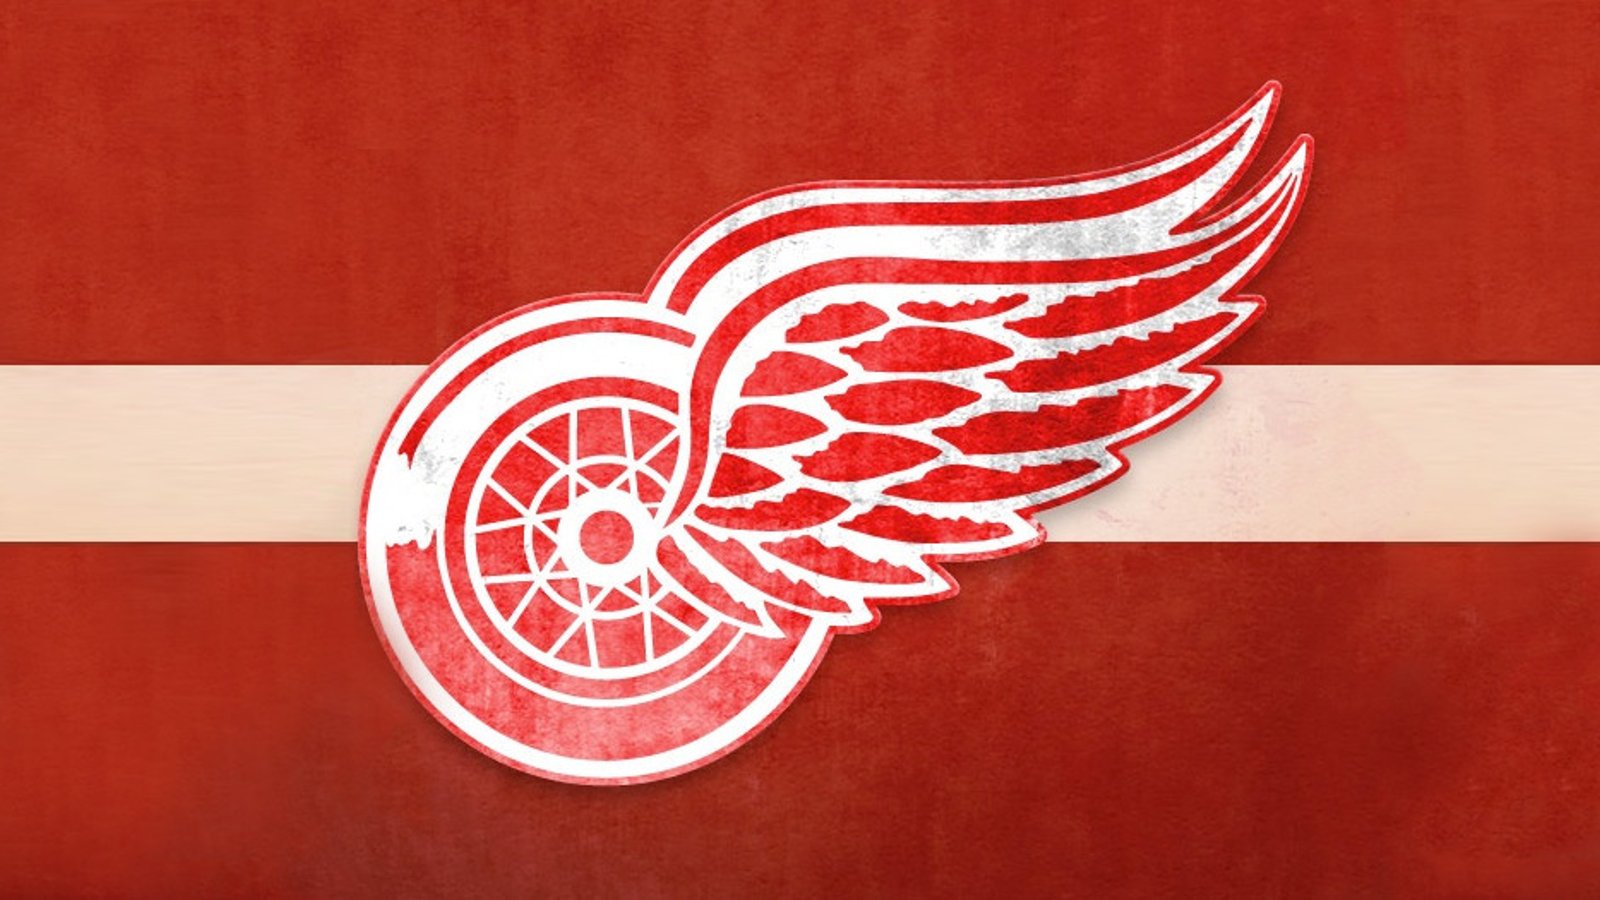 St. James: Red Wings locker room wows, but team could use renovations